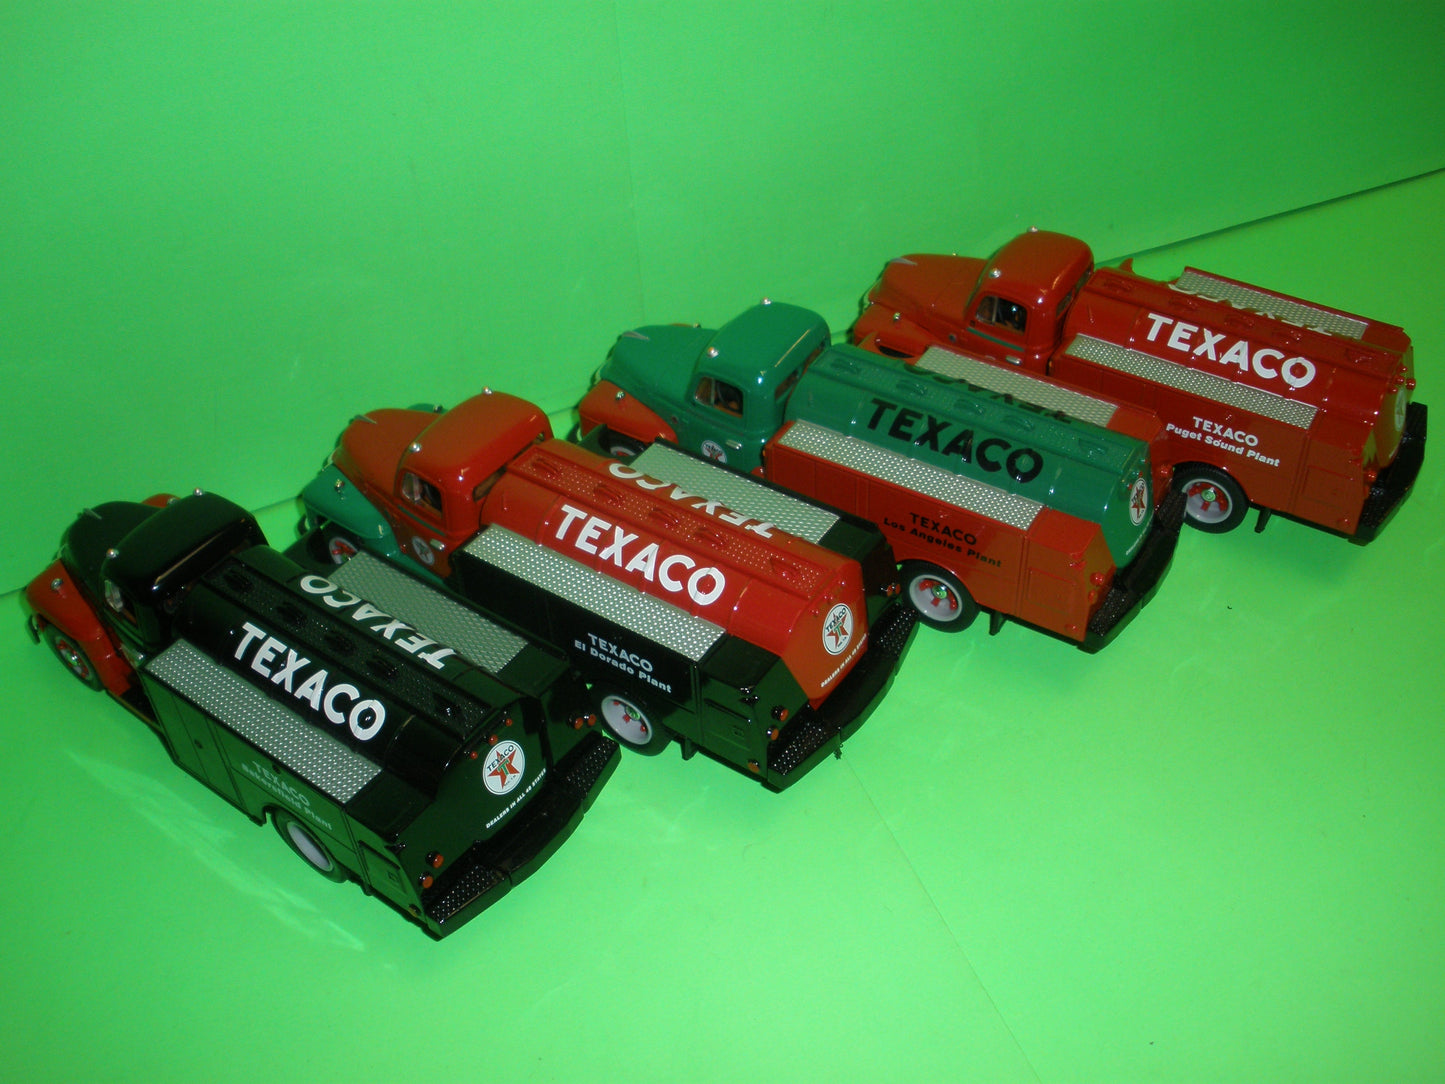 Texaco Refinery Series Set of 4 with Matching Serial Numbers - 1955 Diamond T Tanker Trucks